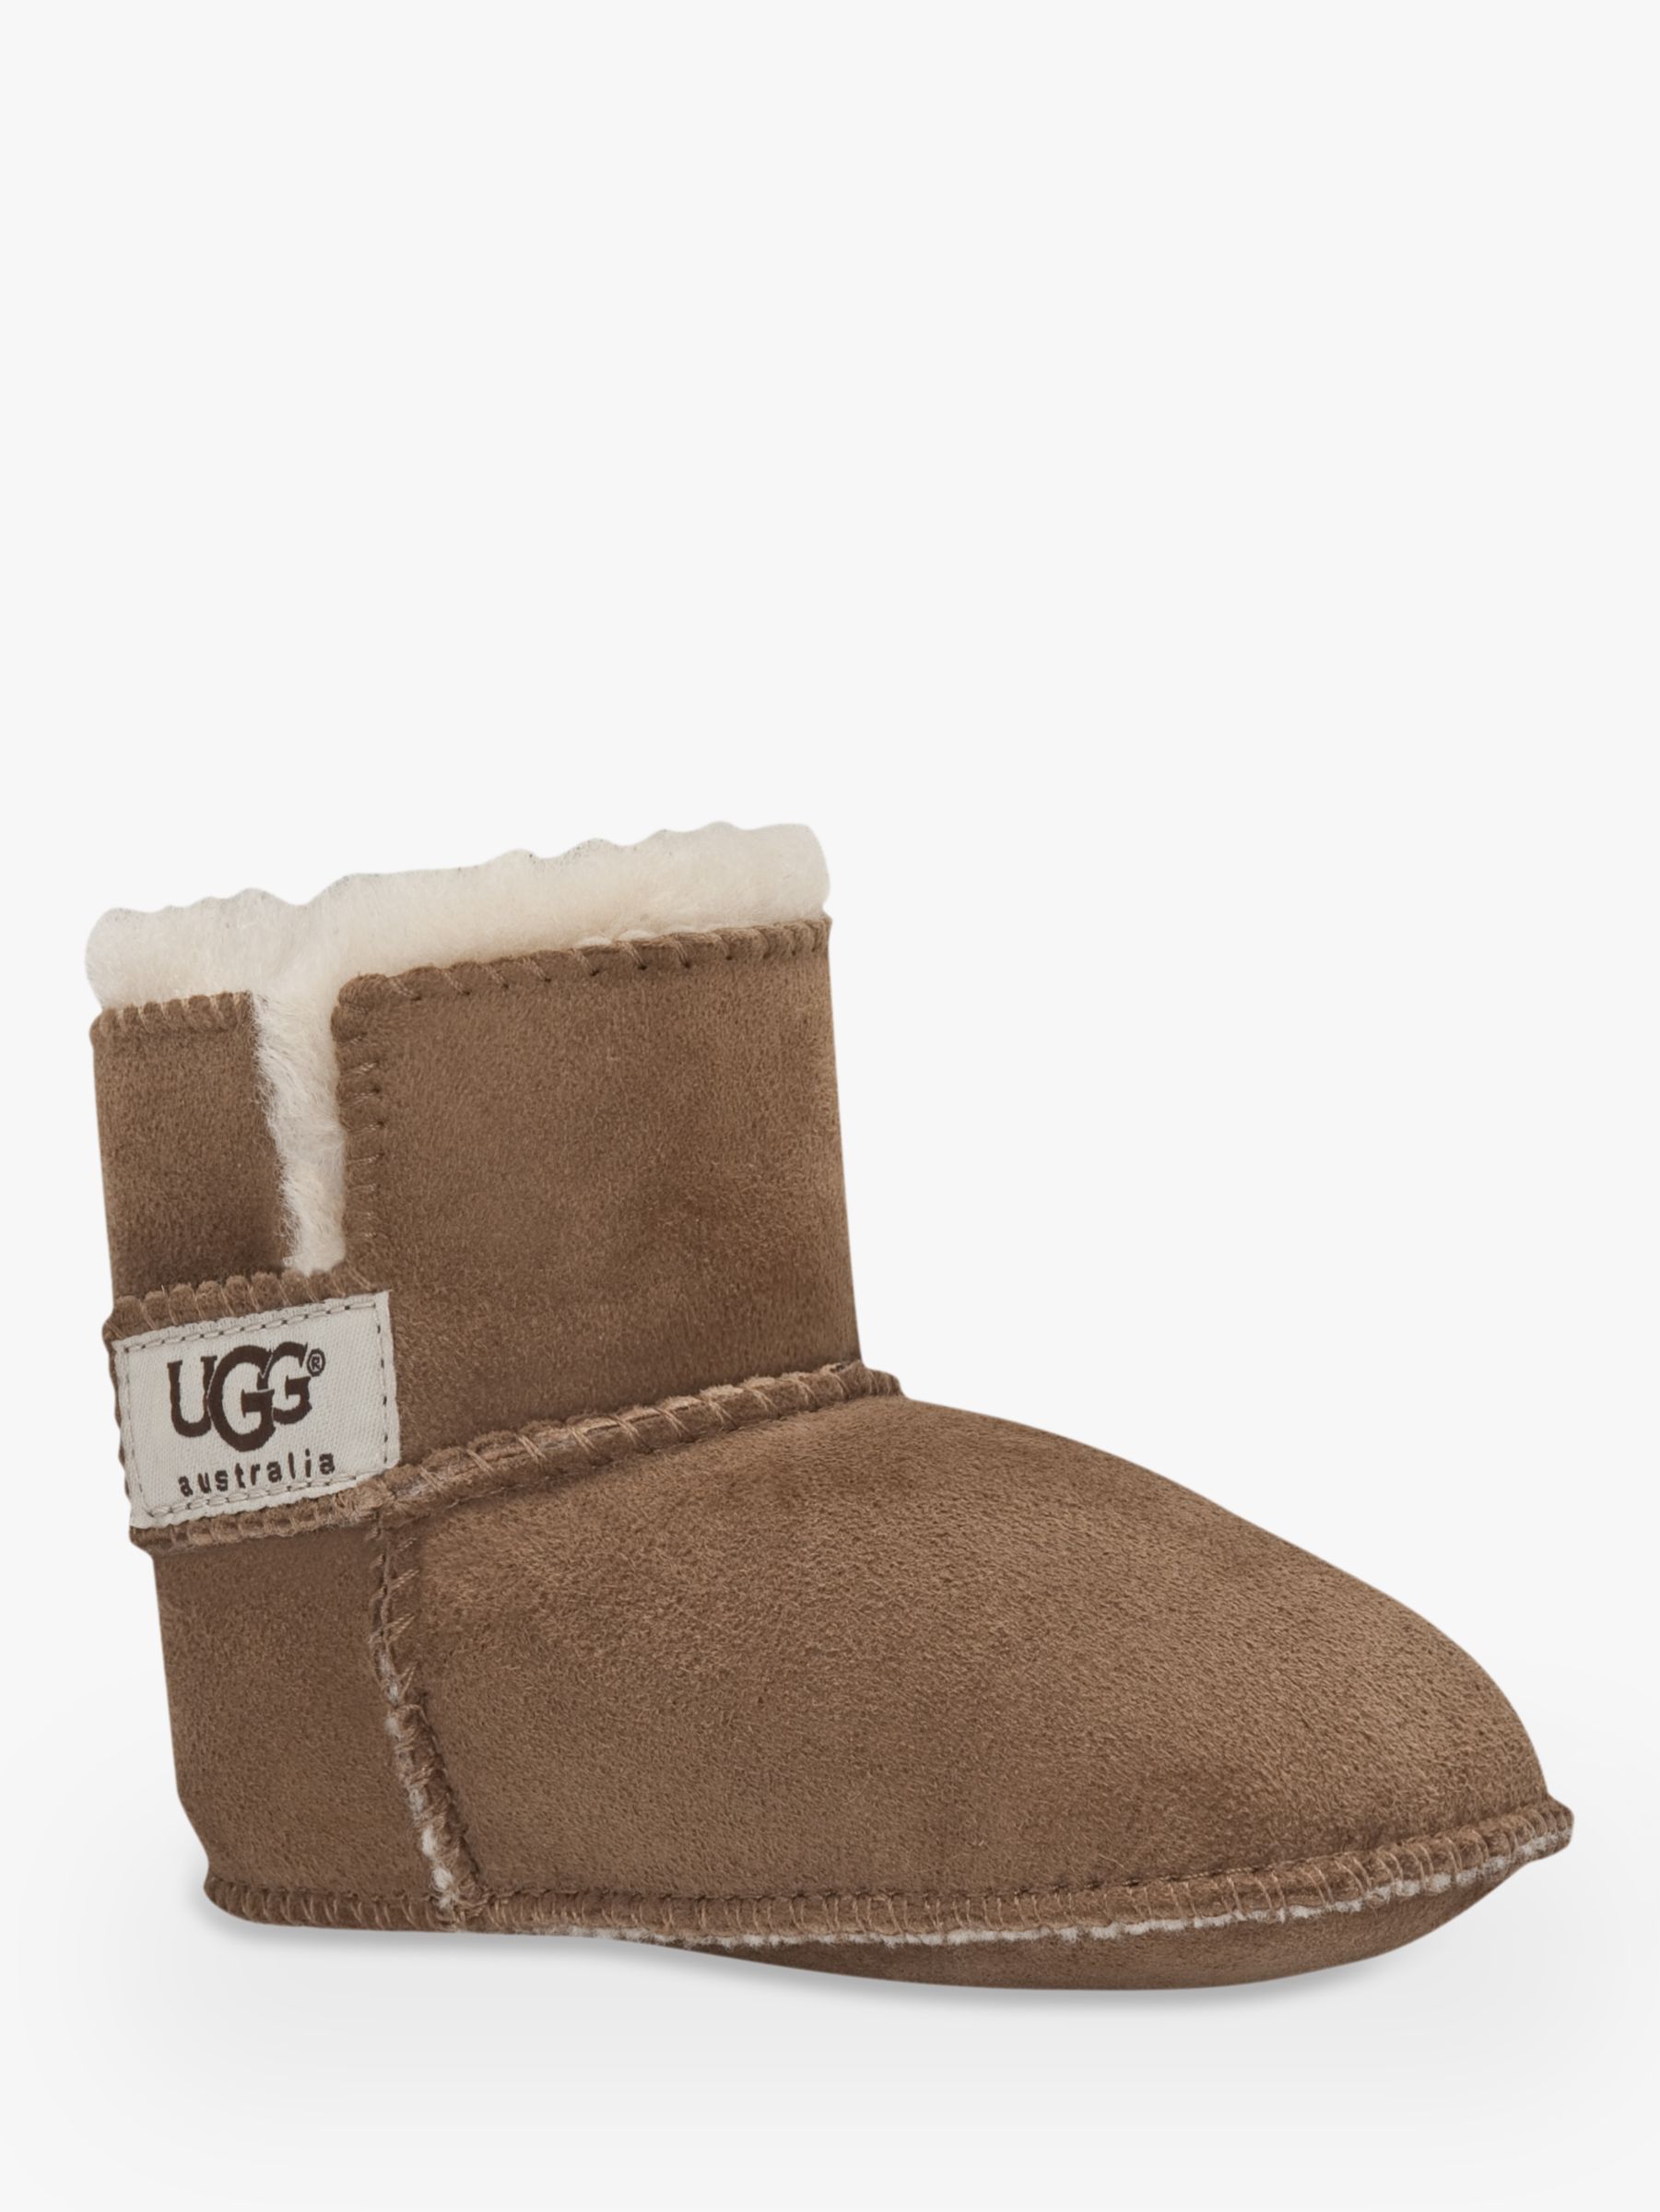 baby uggs size small